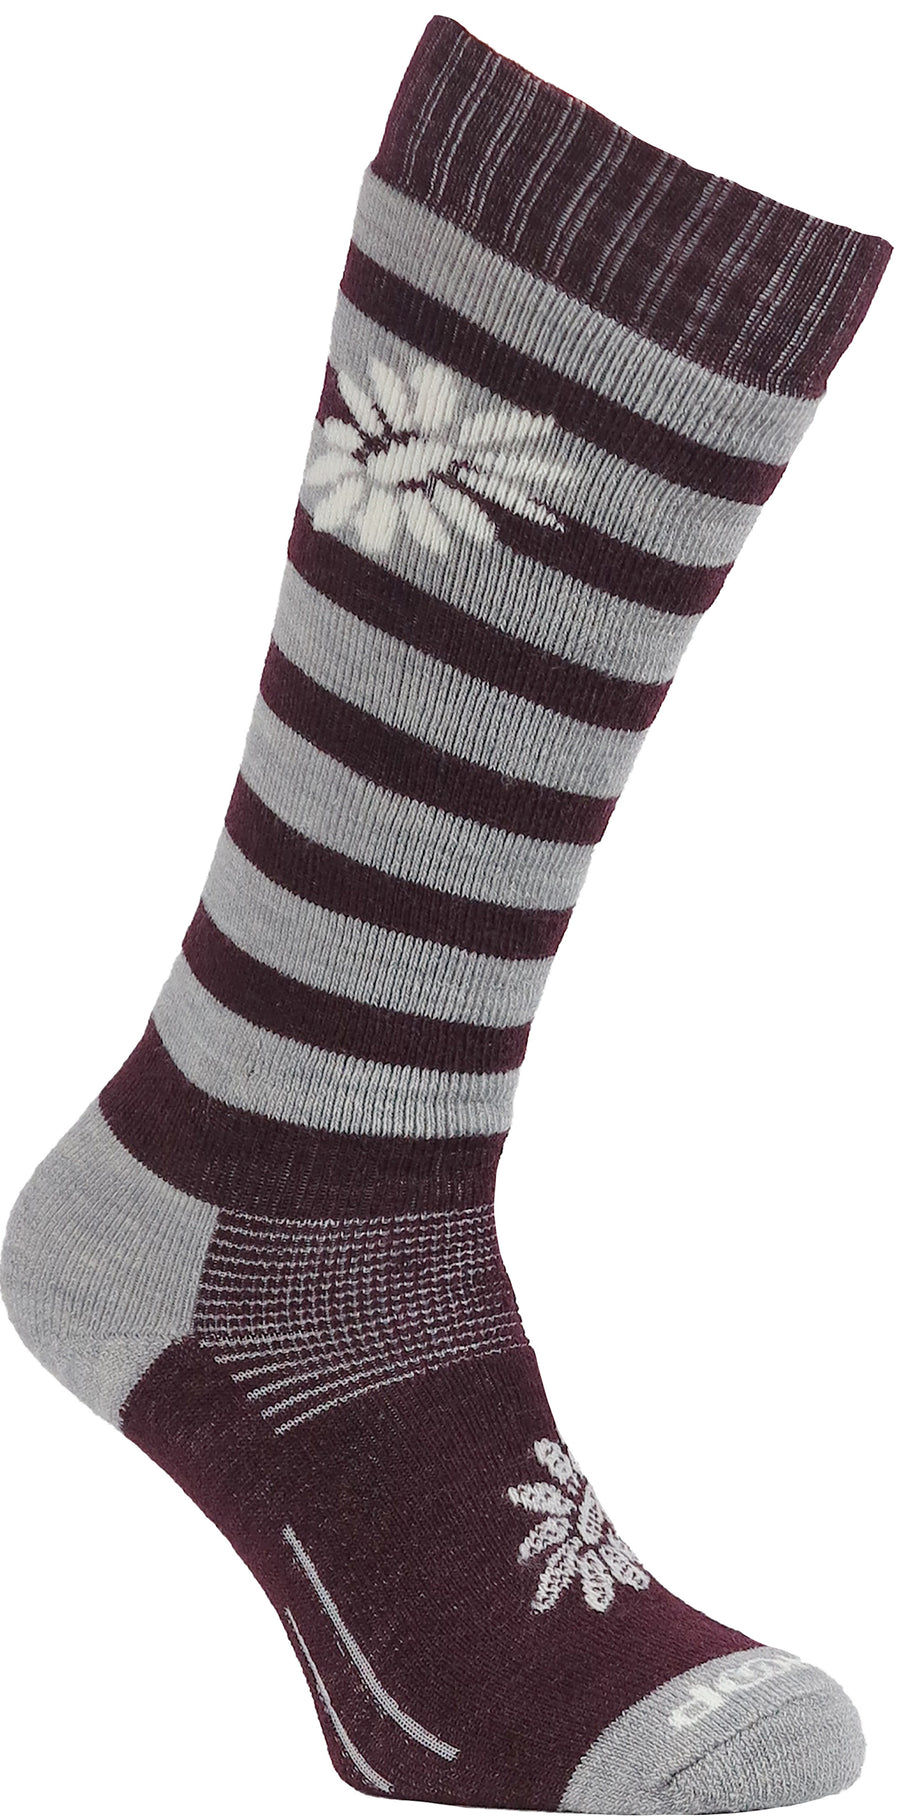 thick burgandy and grey striped wool sock from skhoop